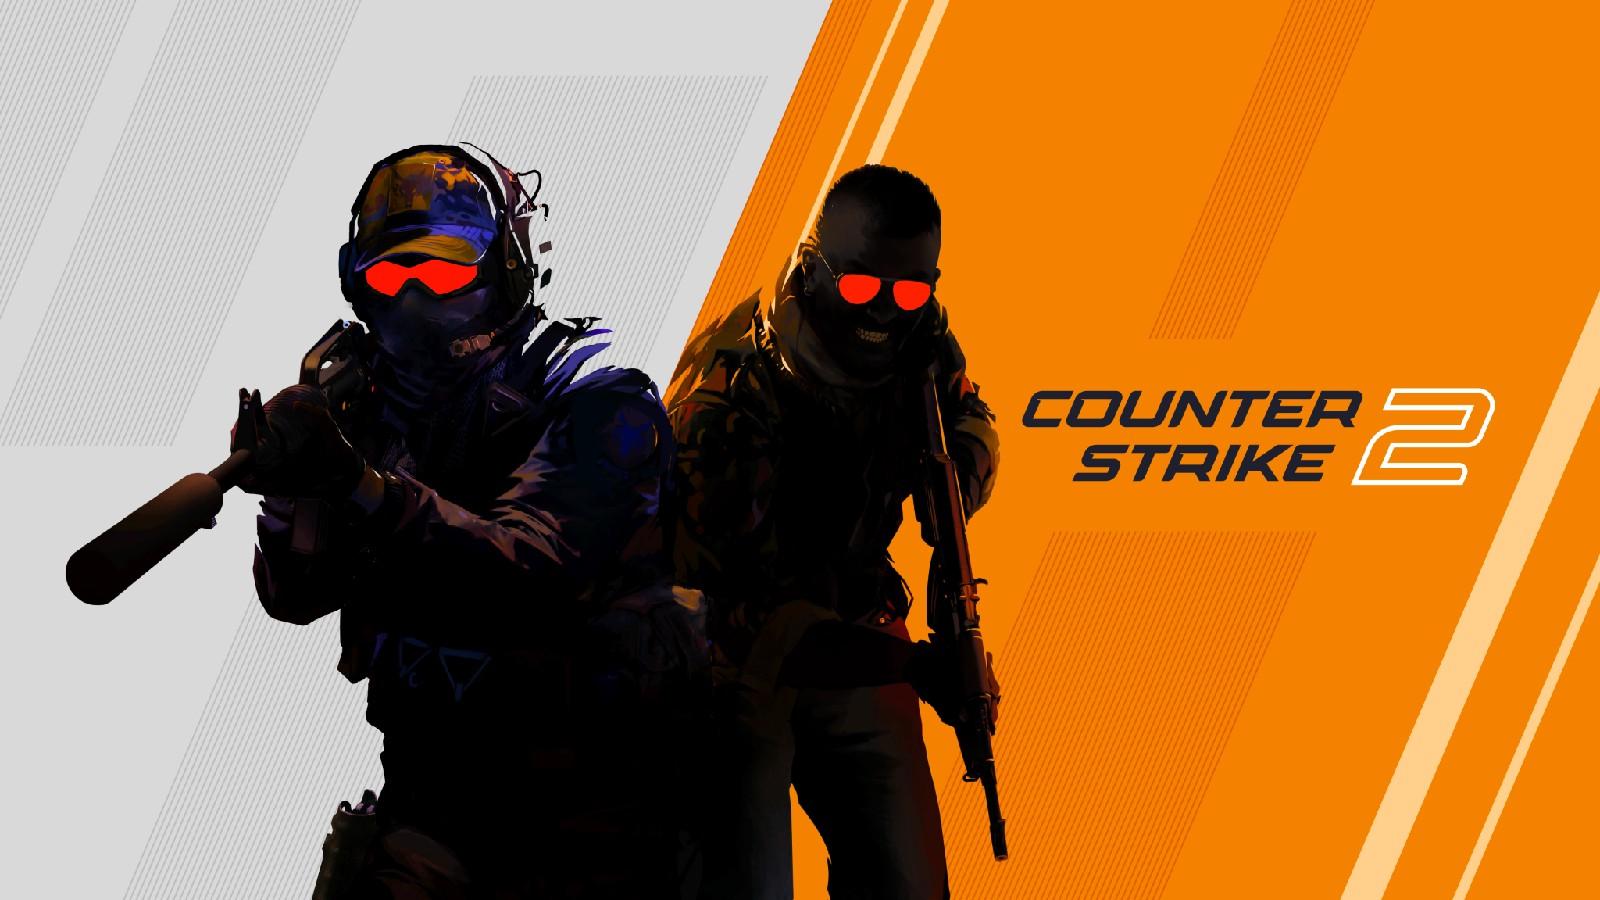 What we know about Counter-Strike 2: release date, beta test date